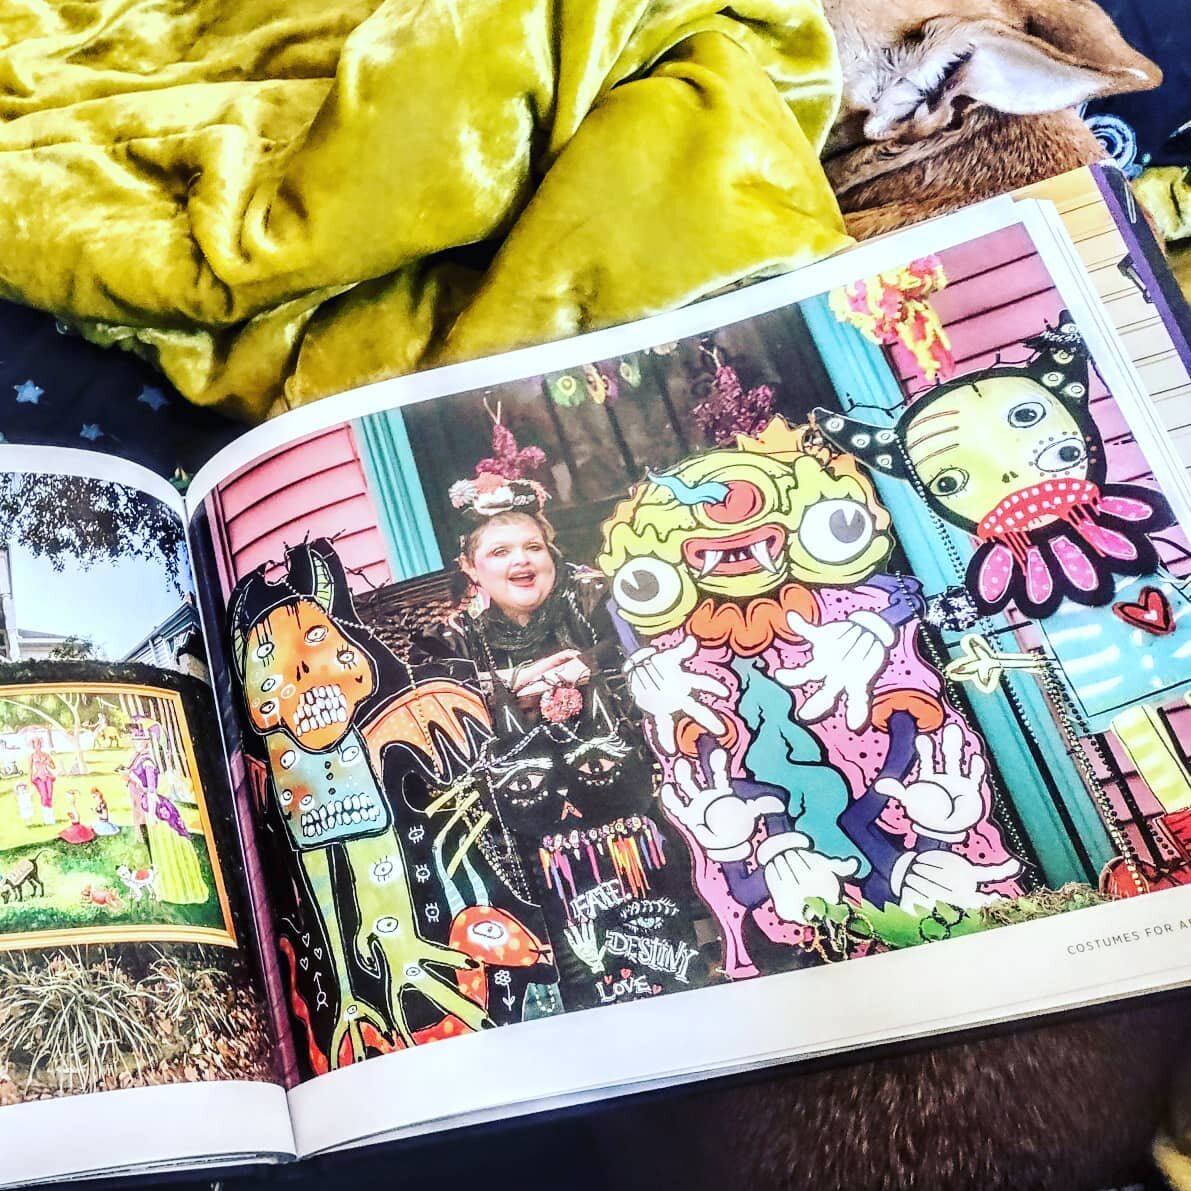 My copy just arrived!
#porchesonparade
What a treat I made it on a whole page !!!
Also
@crudethings 
@boogmanson 
@theslurge.weird.art 
@ladybabymiss 

#mardigras
#neworleansartists
#nolalife
#kookland
#kooklandhausoffortune